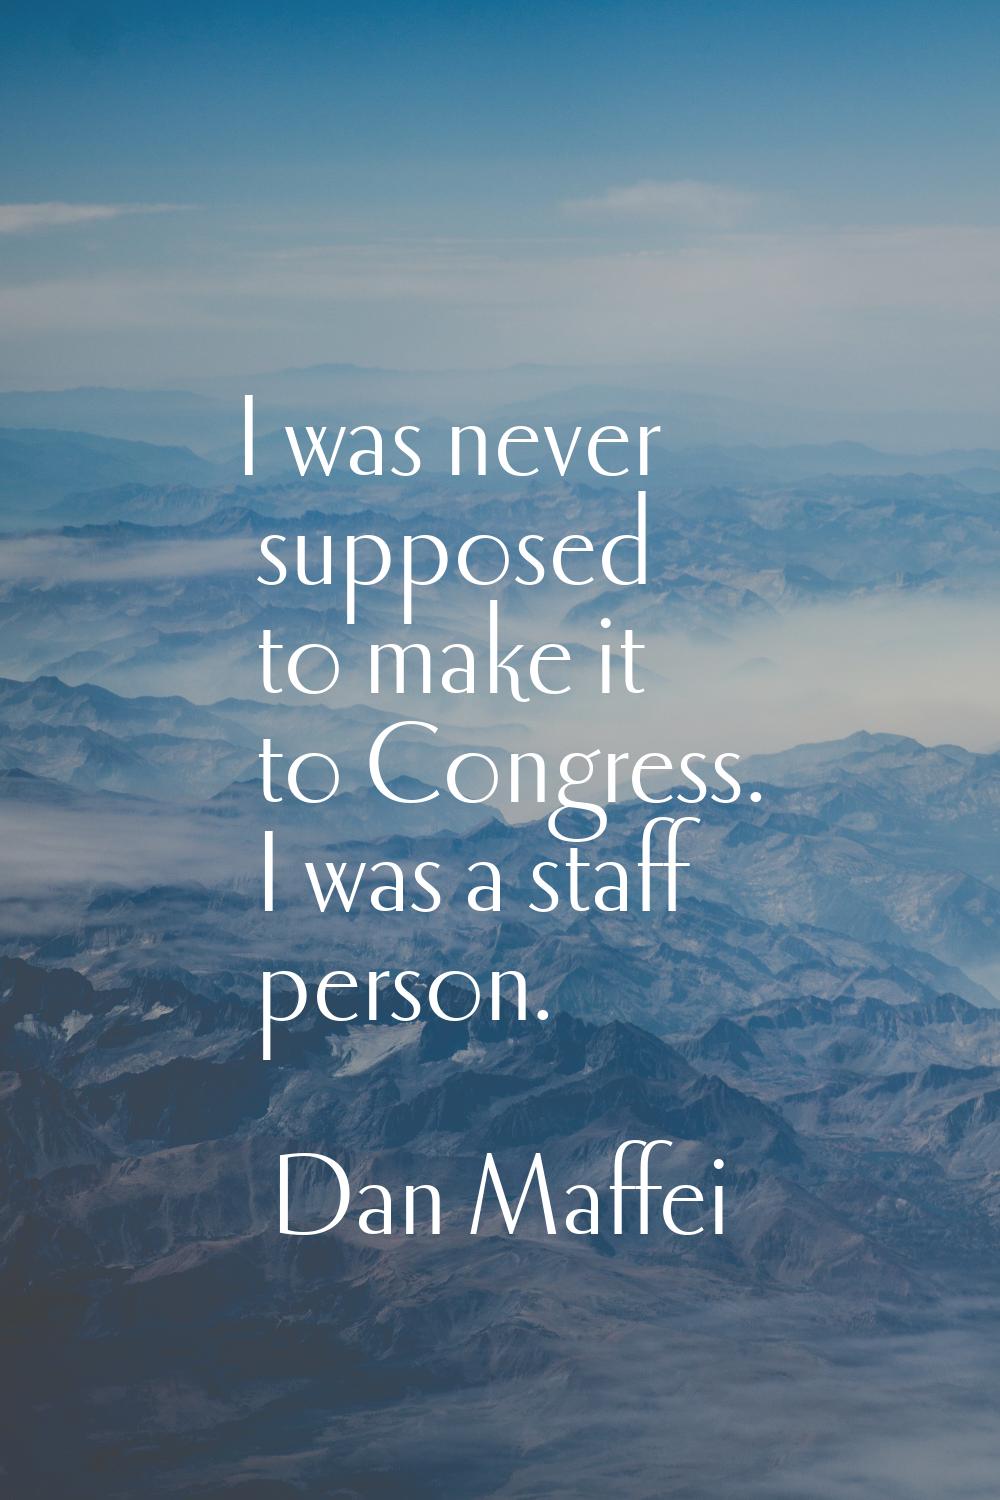 I was never supposed to make it to Congress. I was a staff person.